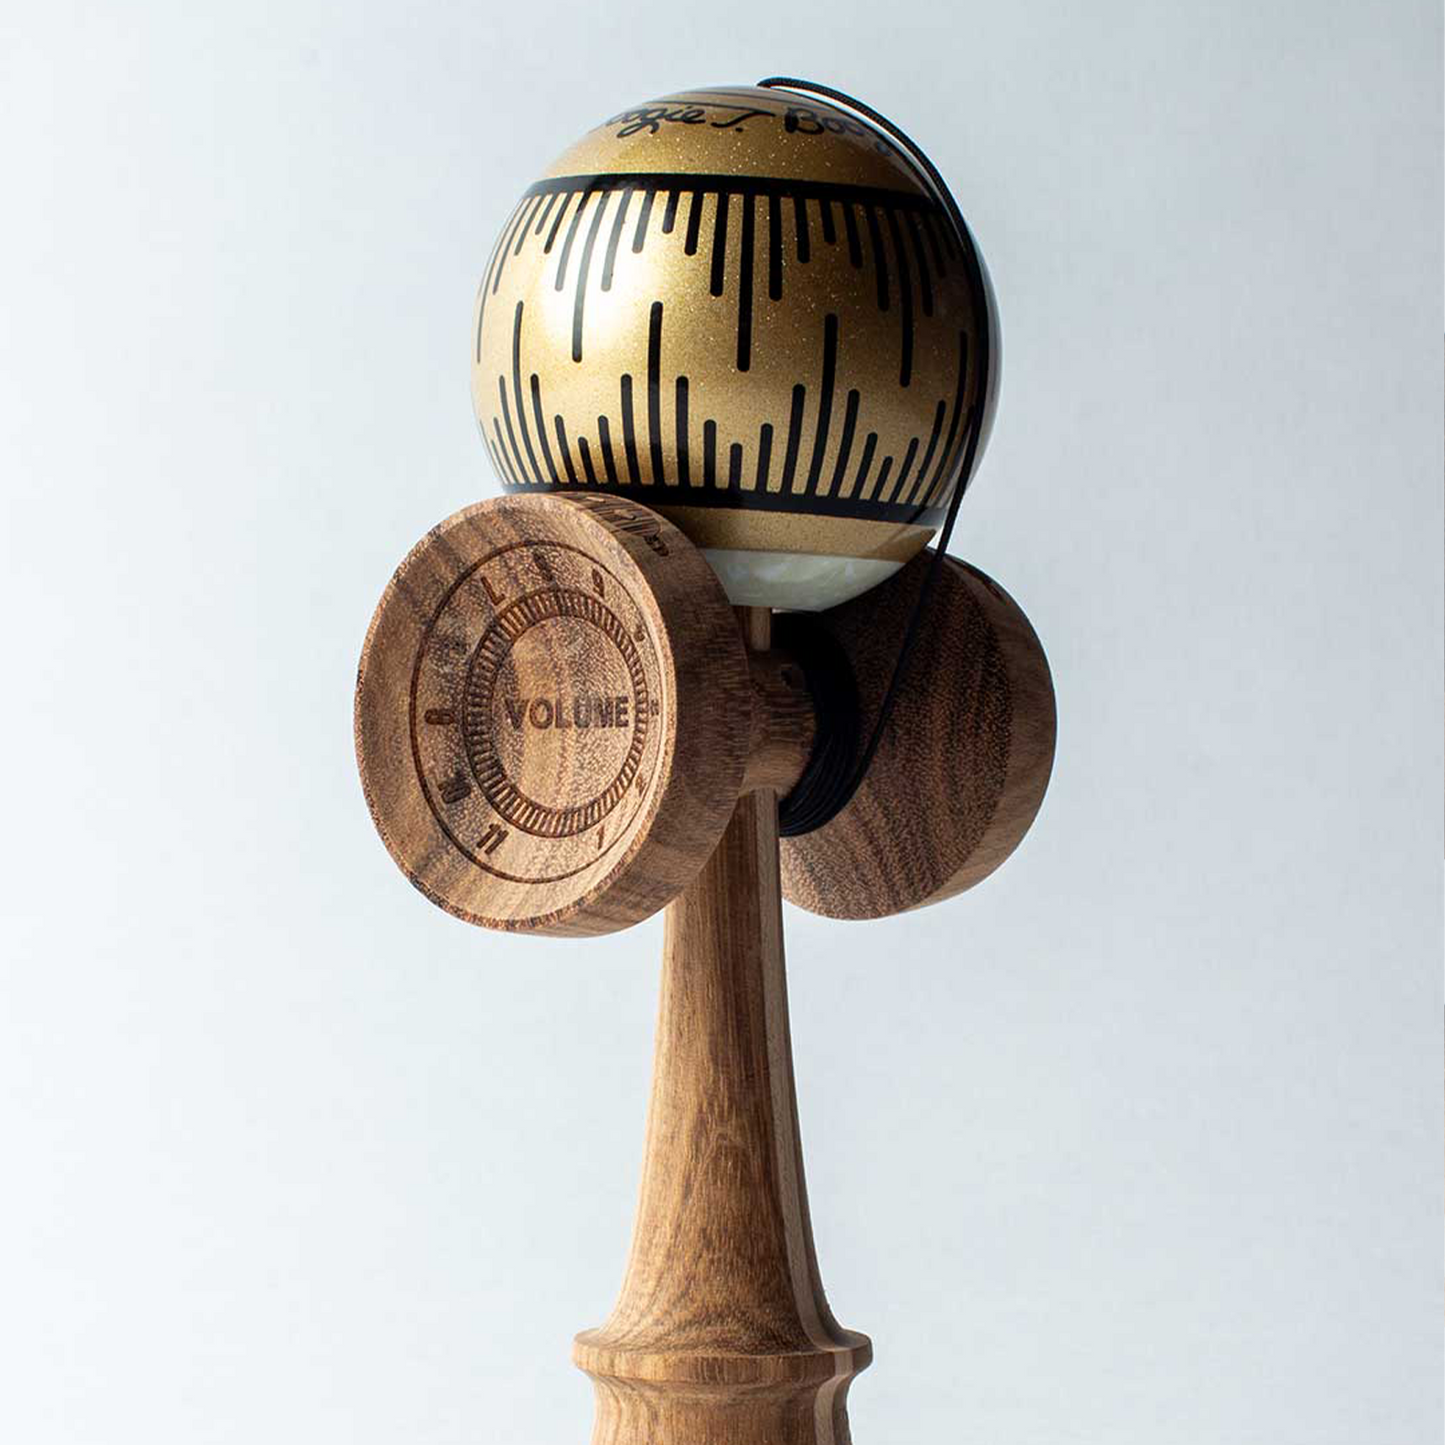 BOOGIE T - GOLD - AMPED - KENDAMA